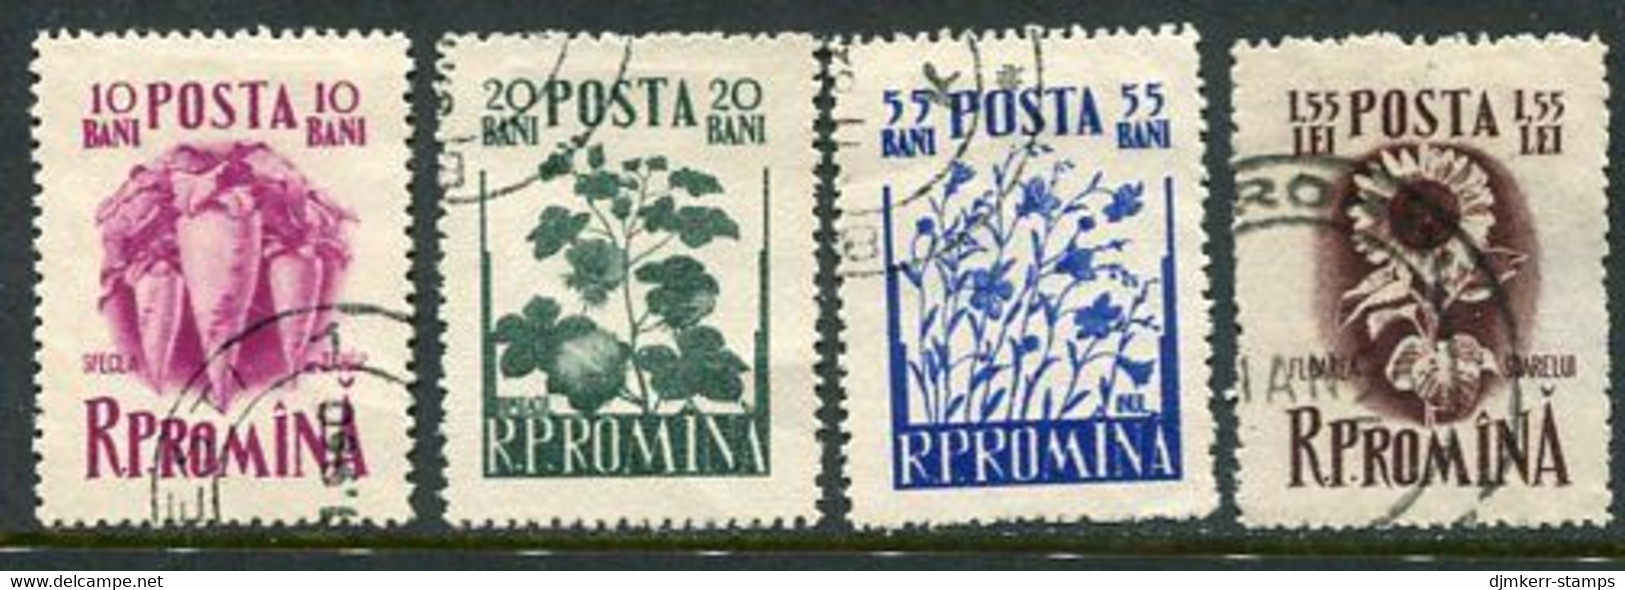 ROMANIA 1955 Agricultural Plants Used.  Michel 1547-50 - Usado